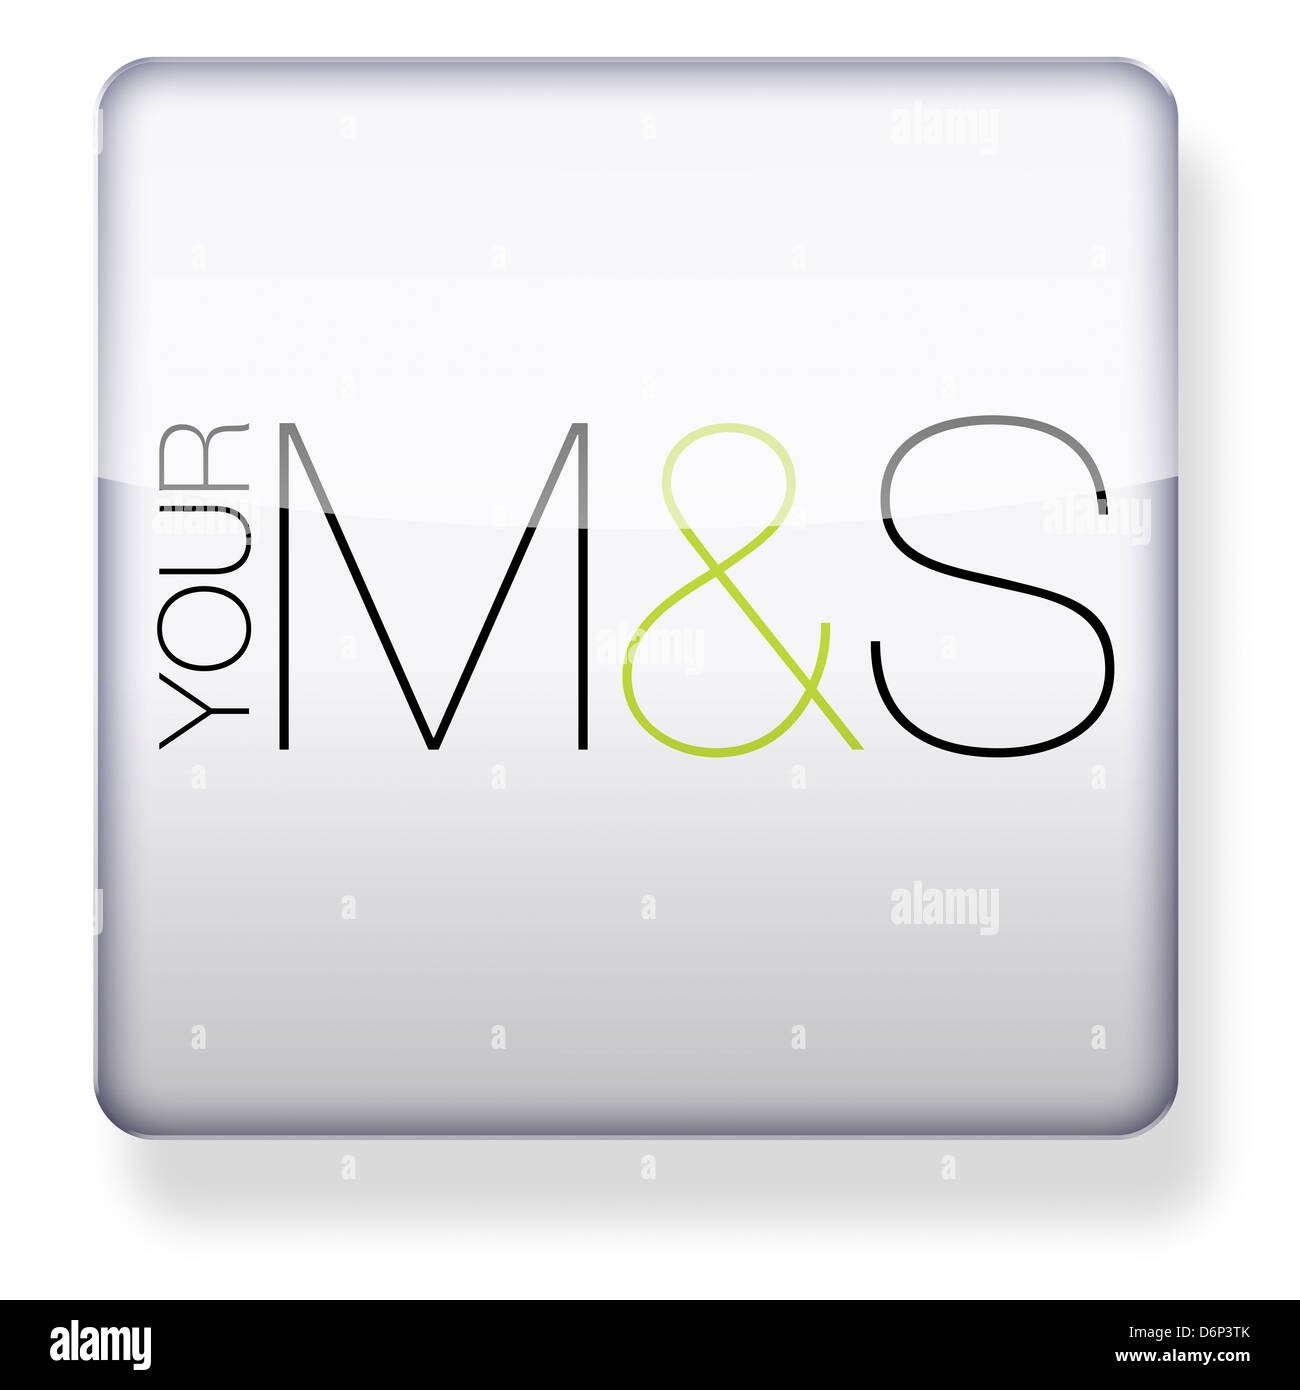 Marks and Spencer logo as an app icon. Clipping path included. Stock Photo